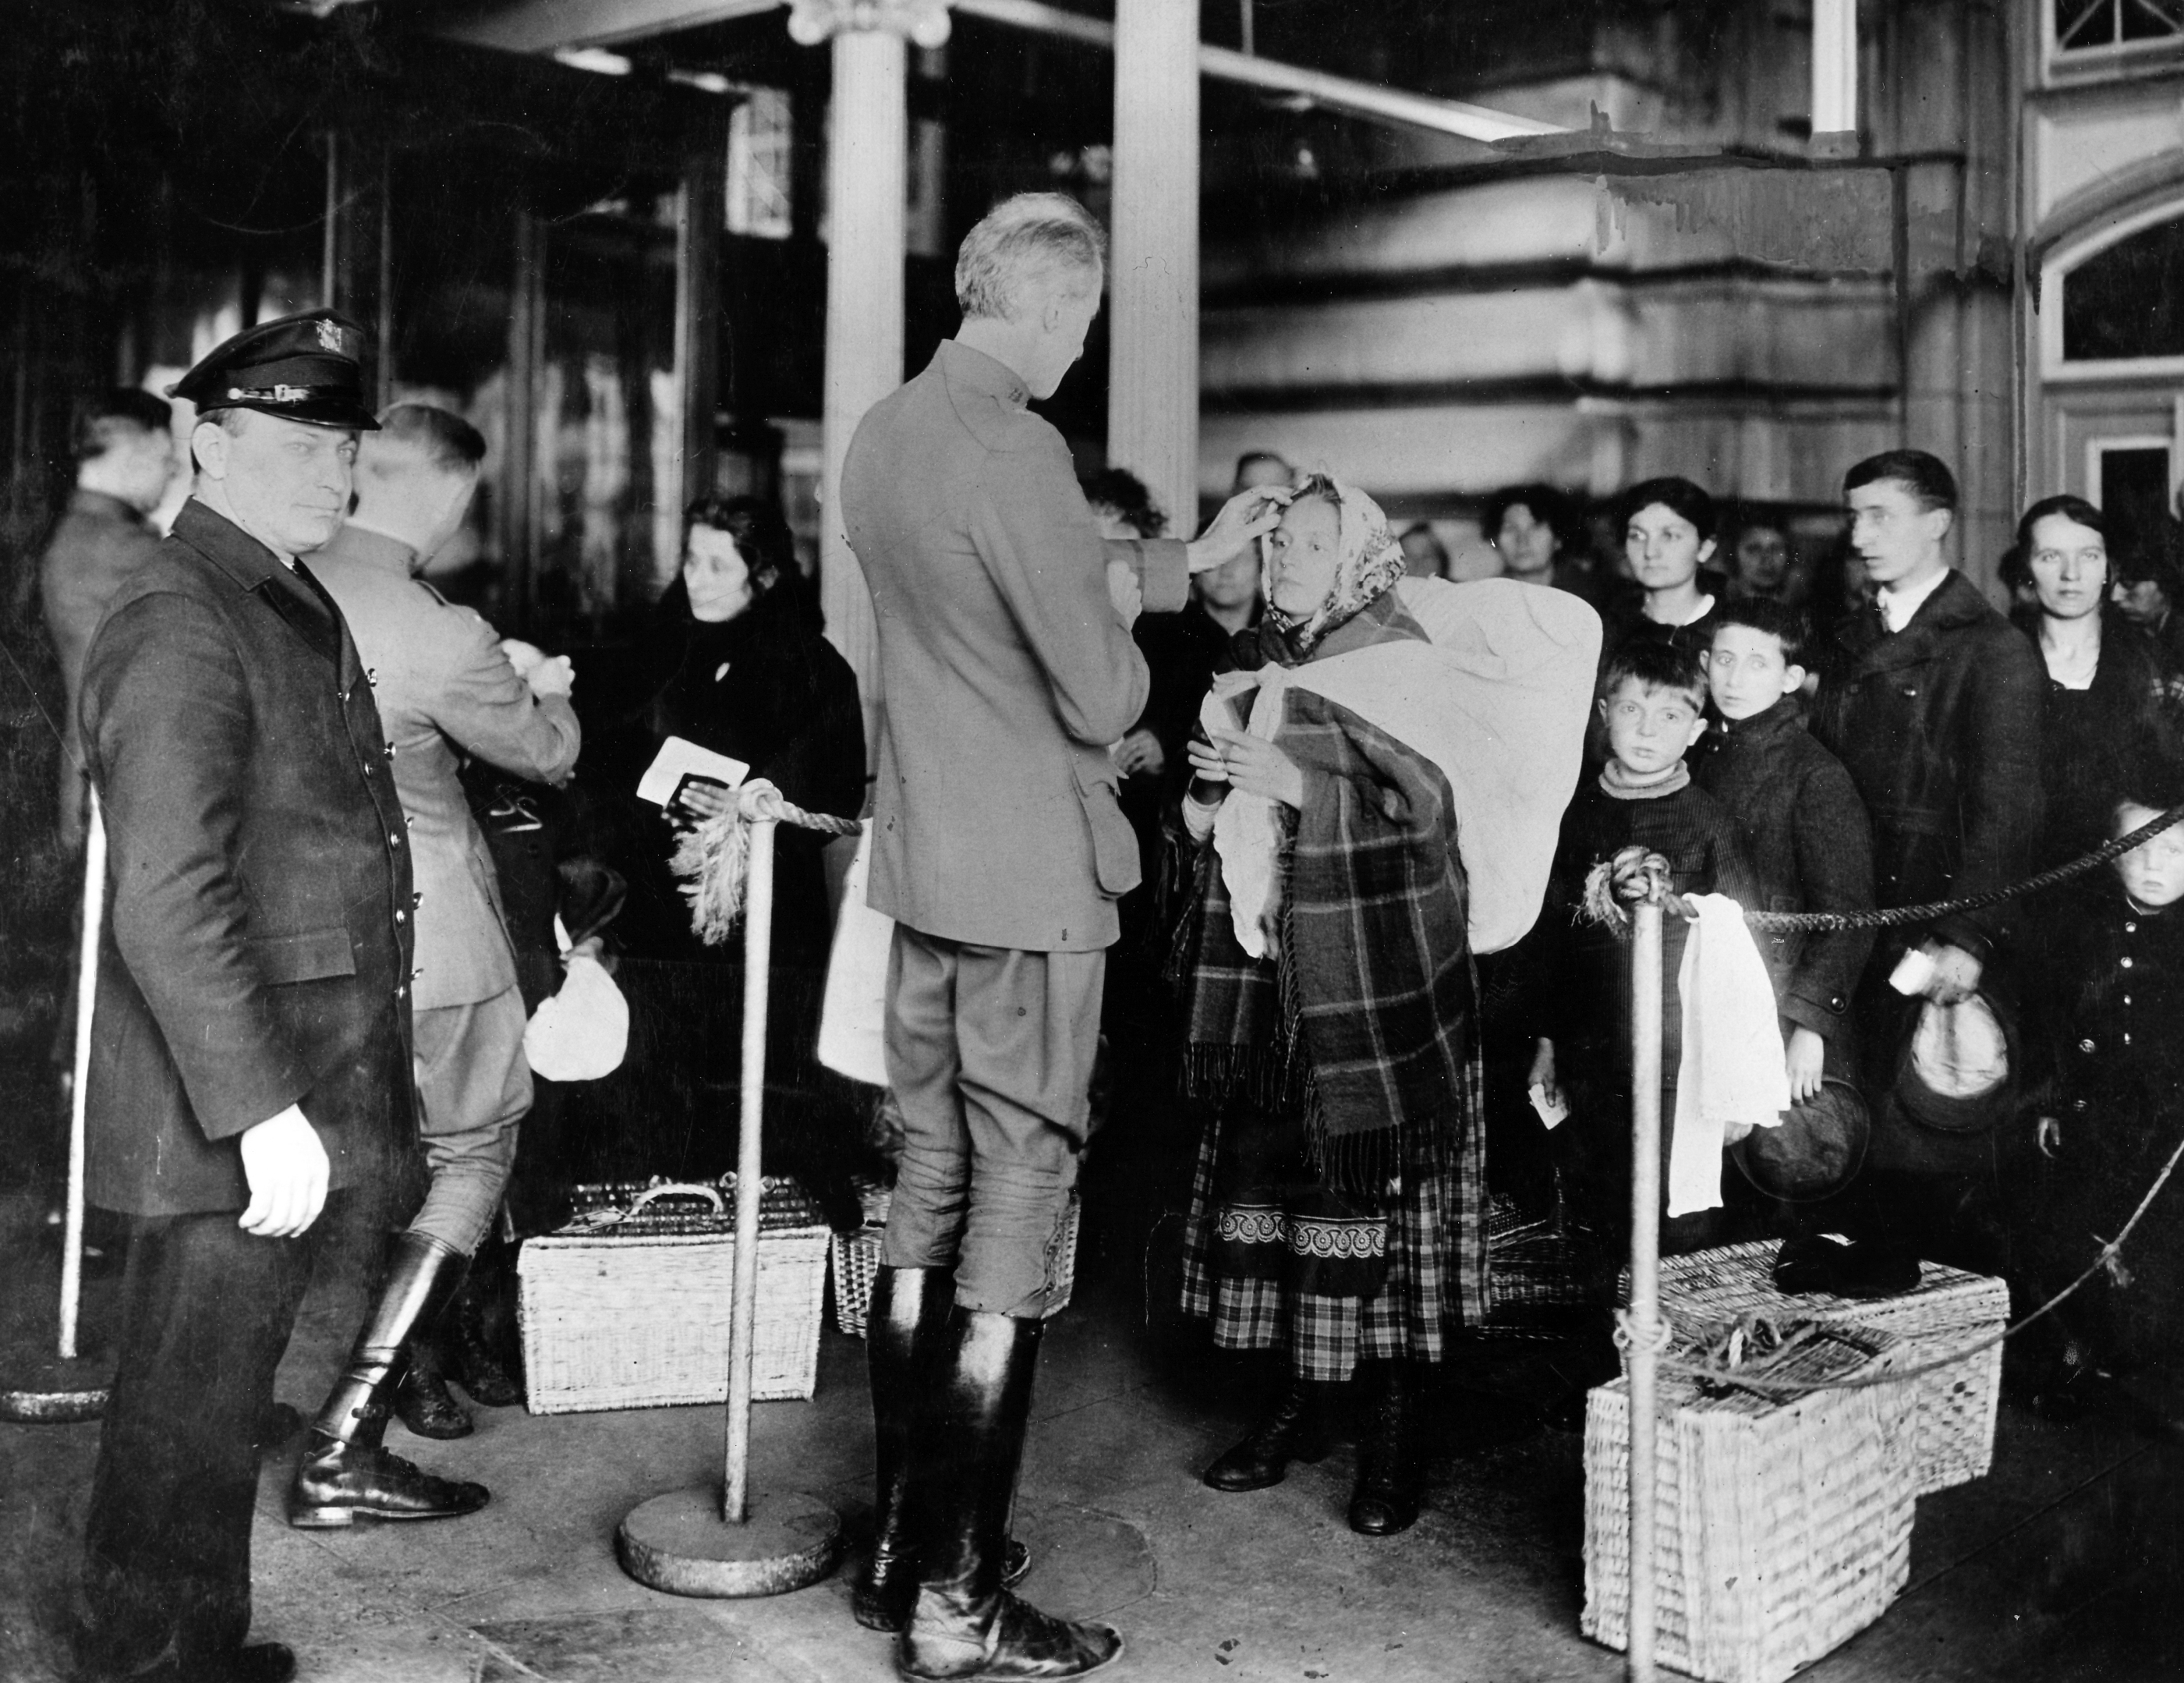 Public Health Service officers examining immigrants arriving to Ellis Island